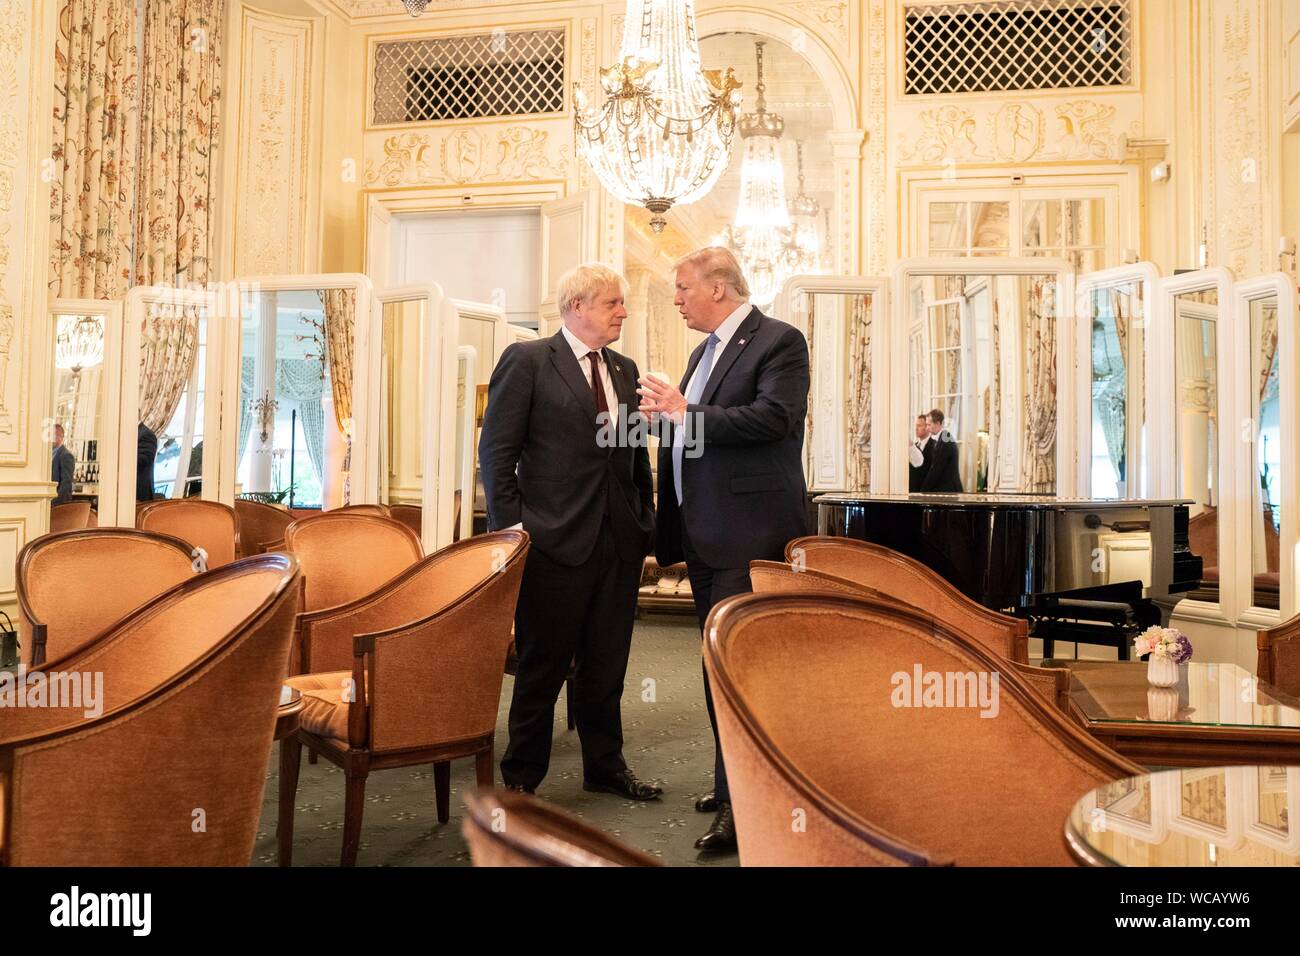 U.S. President Donald Trump, right, chats with British Prime Minister Boris Johnson following their meeting on the sidelines of the G7 Summit at the Hotel du Palais Biarritz August 25, 2019 in Biarritz, France. Stock Photo